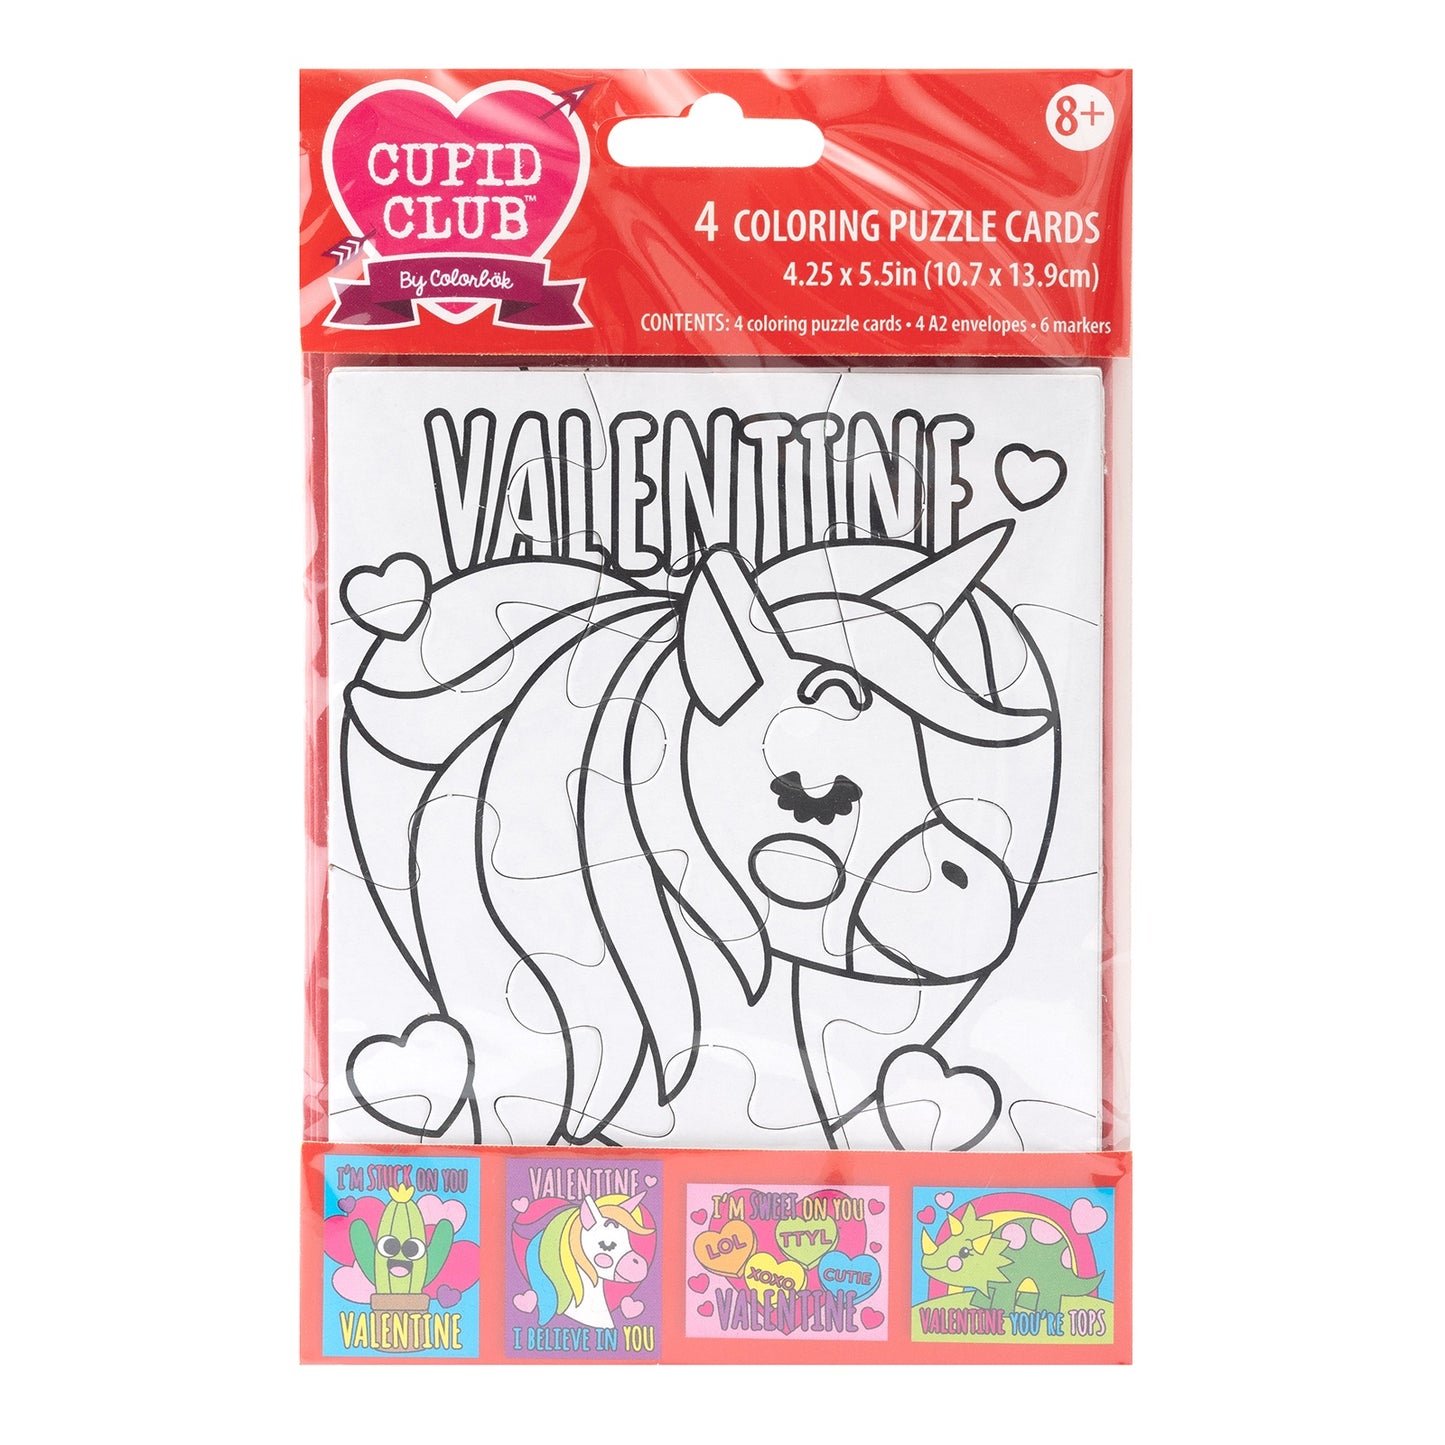 Colorbok Cupid Club Color Your Own Puzzle Card Kit-Unicorn, Makes 4